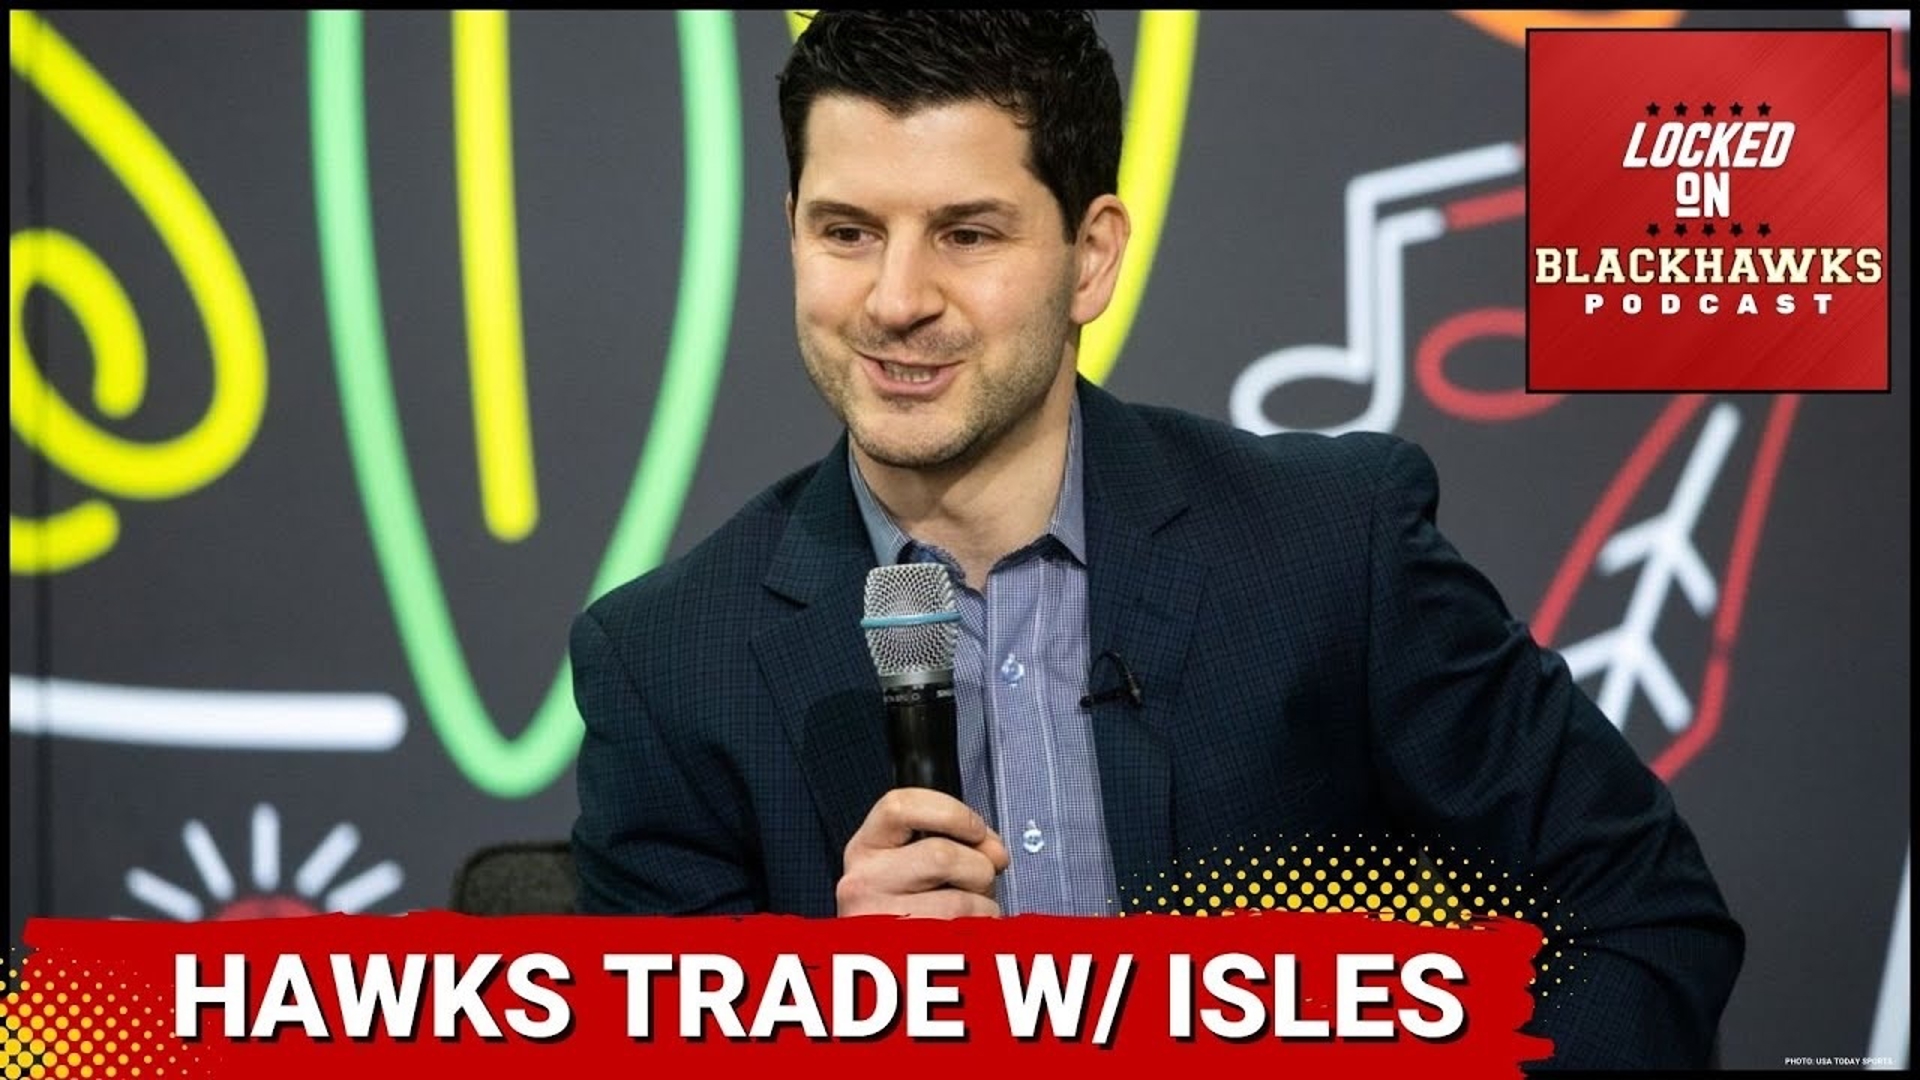 Saturday's episode begins with a recap of the Chicago Blackhawks' trade with the New York Islanders.